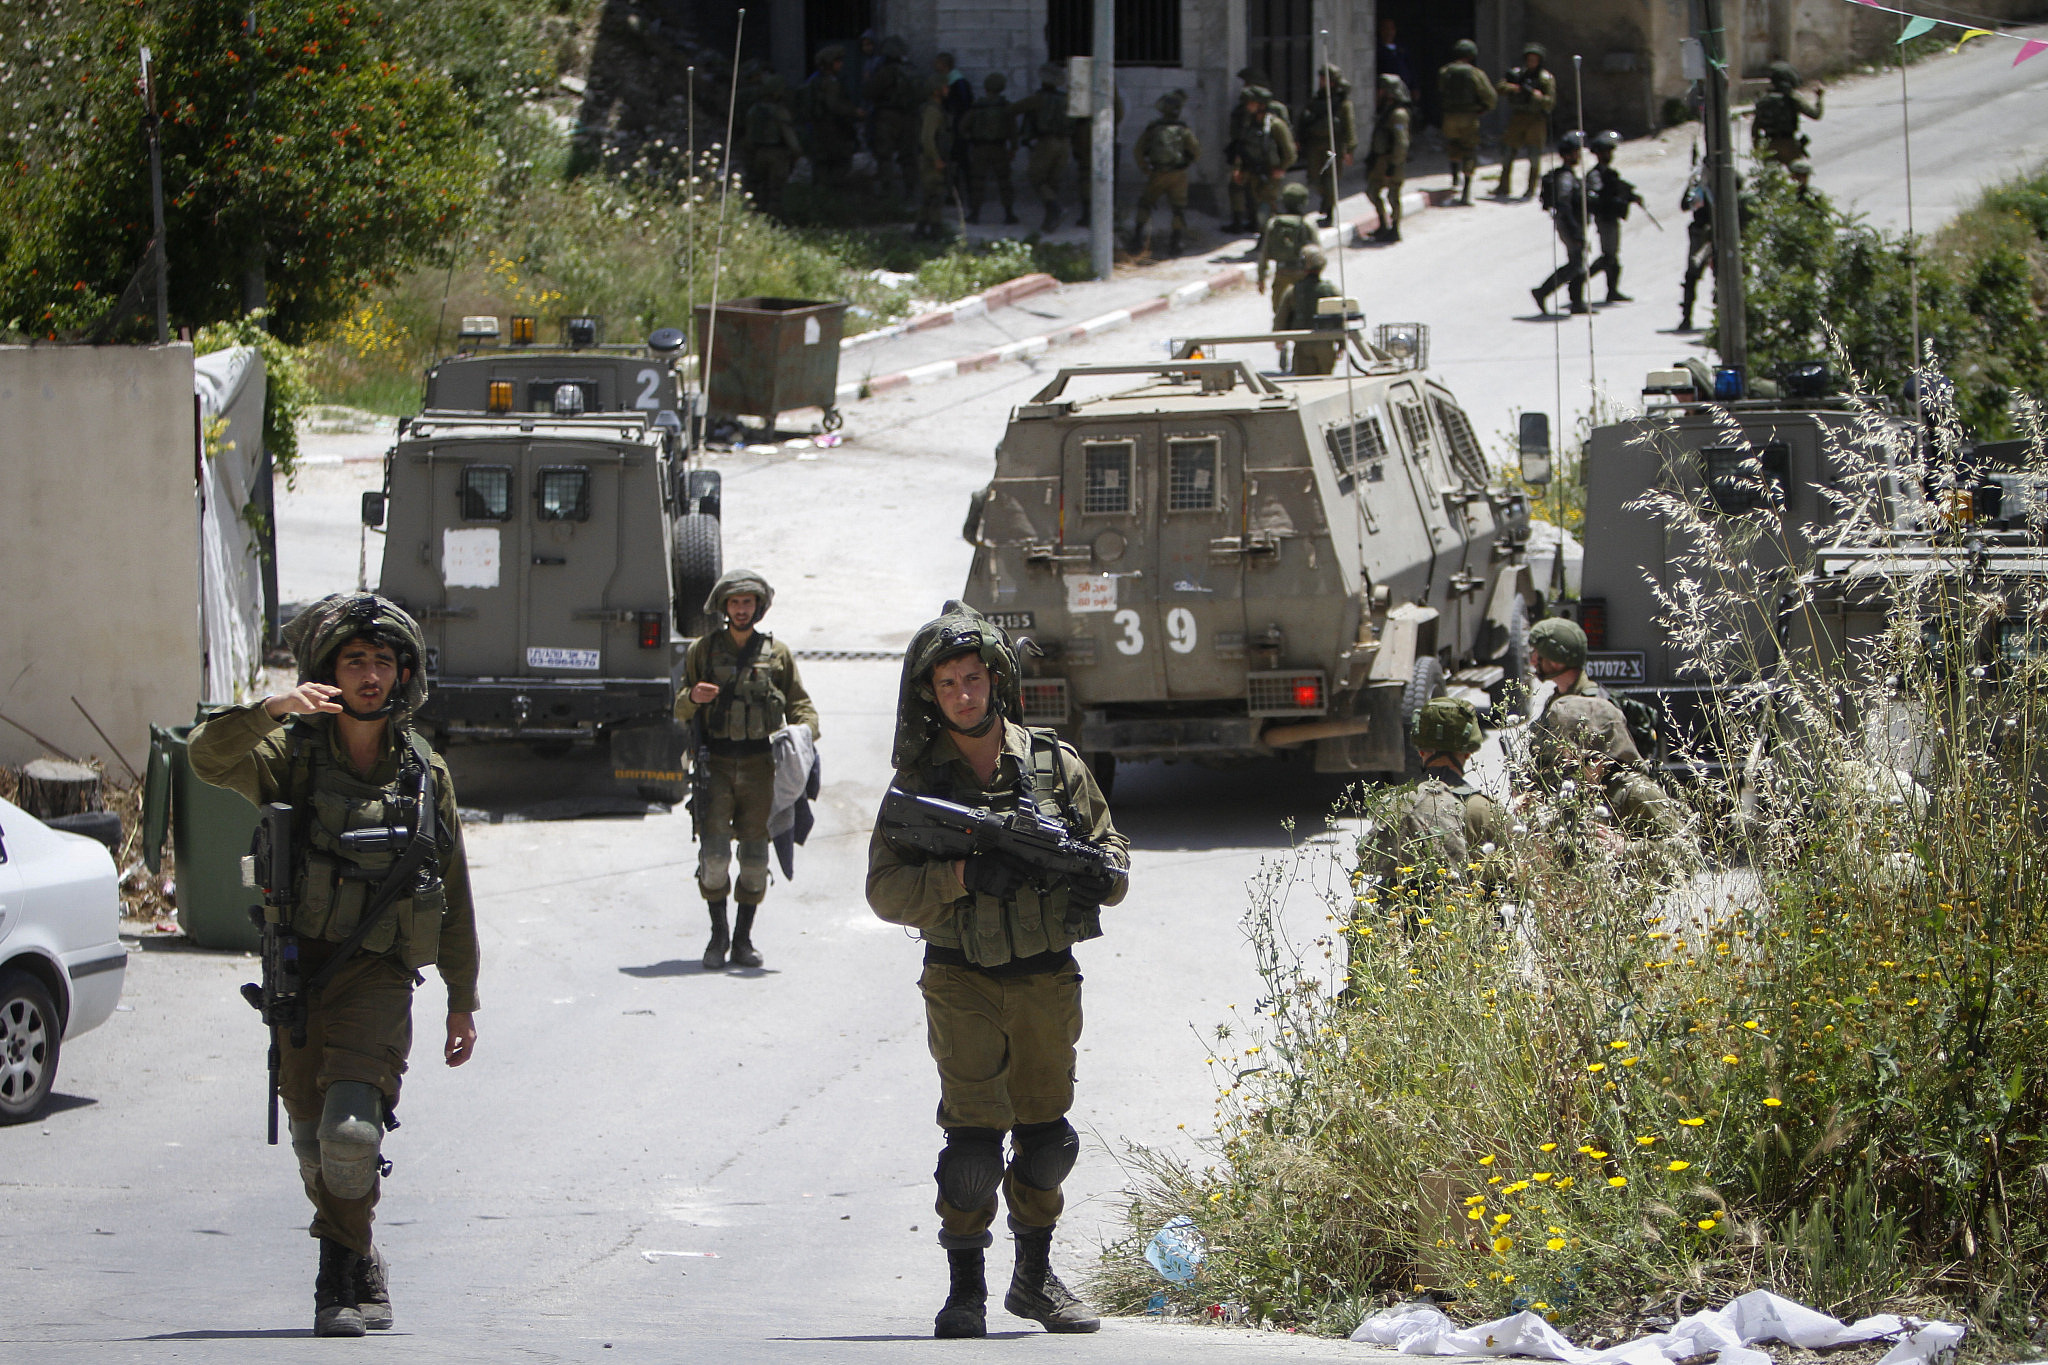 Israeli soldiers detain Palestinians in the village of Yabad near the West Bank city of Jenin during a search operation after the death of an Israeli soldier, May 12, 2020. (Nasser Ishtayeh/Flash90)